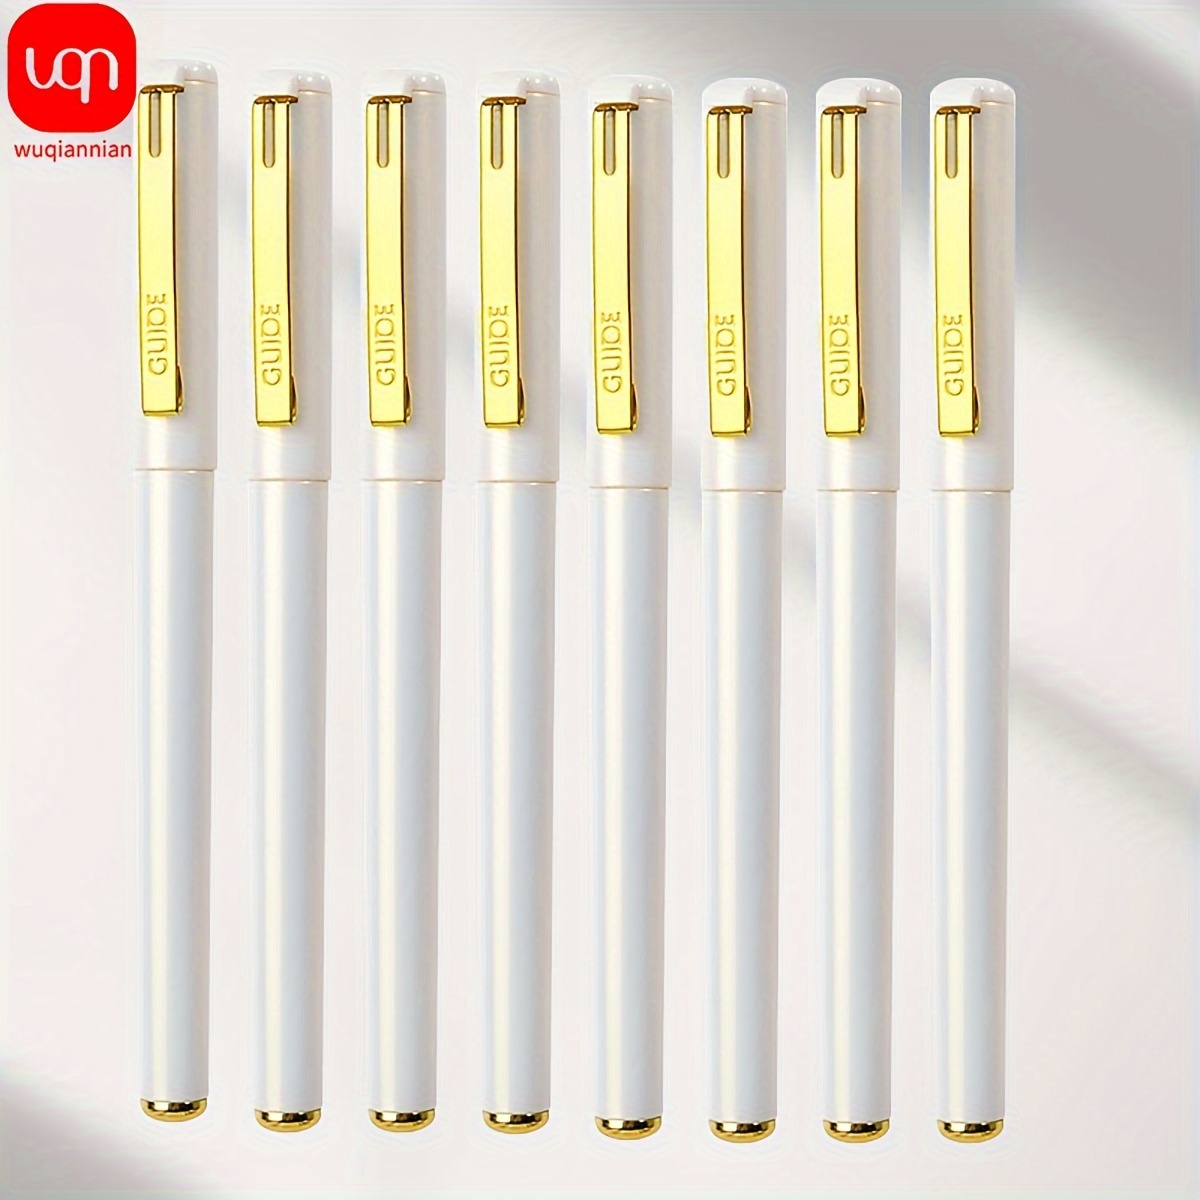 

Wqn Ergonomic Gel Pens, 0.7mm Fine Point, Comfort Grip With Metal Clip, Smooth Writing For Daily Use & Office - Gold Ink, White Barrel